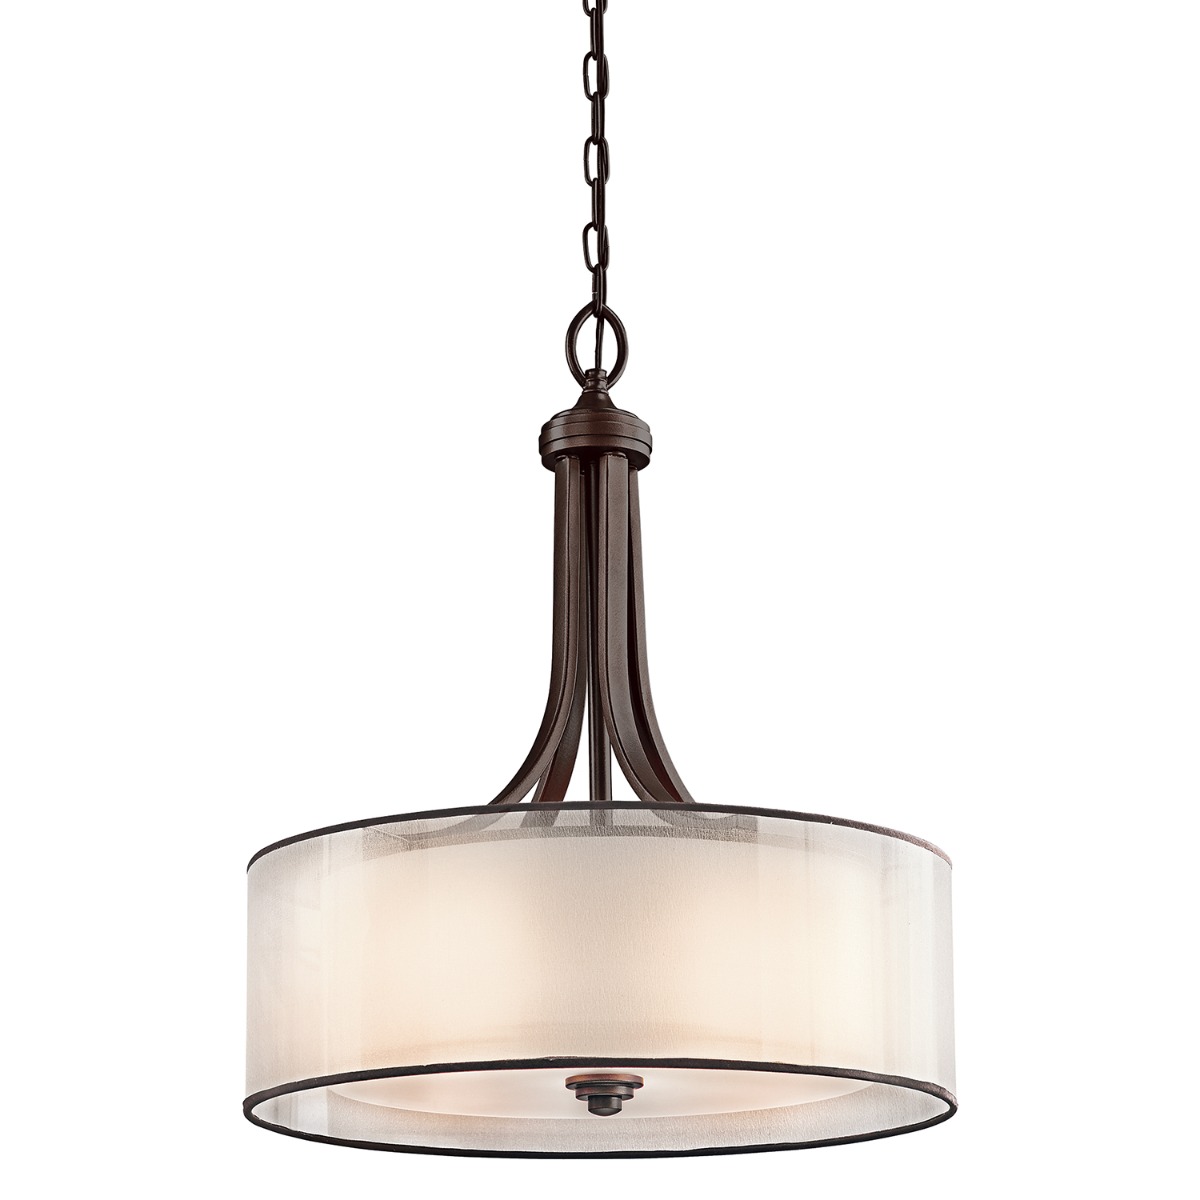 Image of KL-LACEY-P-L-MB Lacey Large Pendant Lampshade Bronze Finish